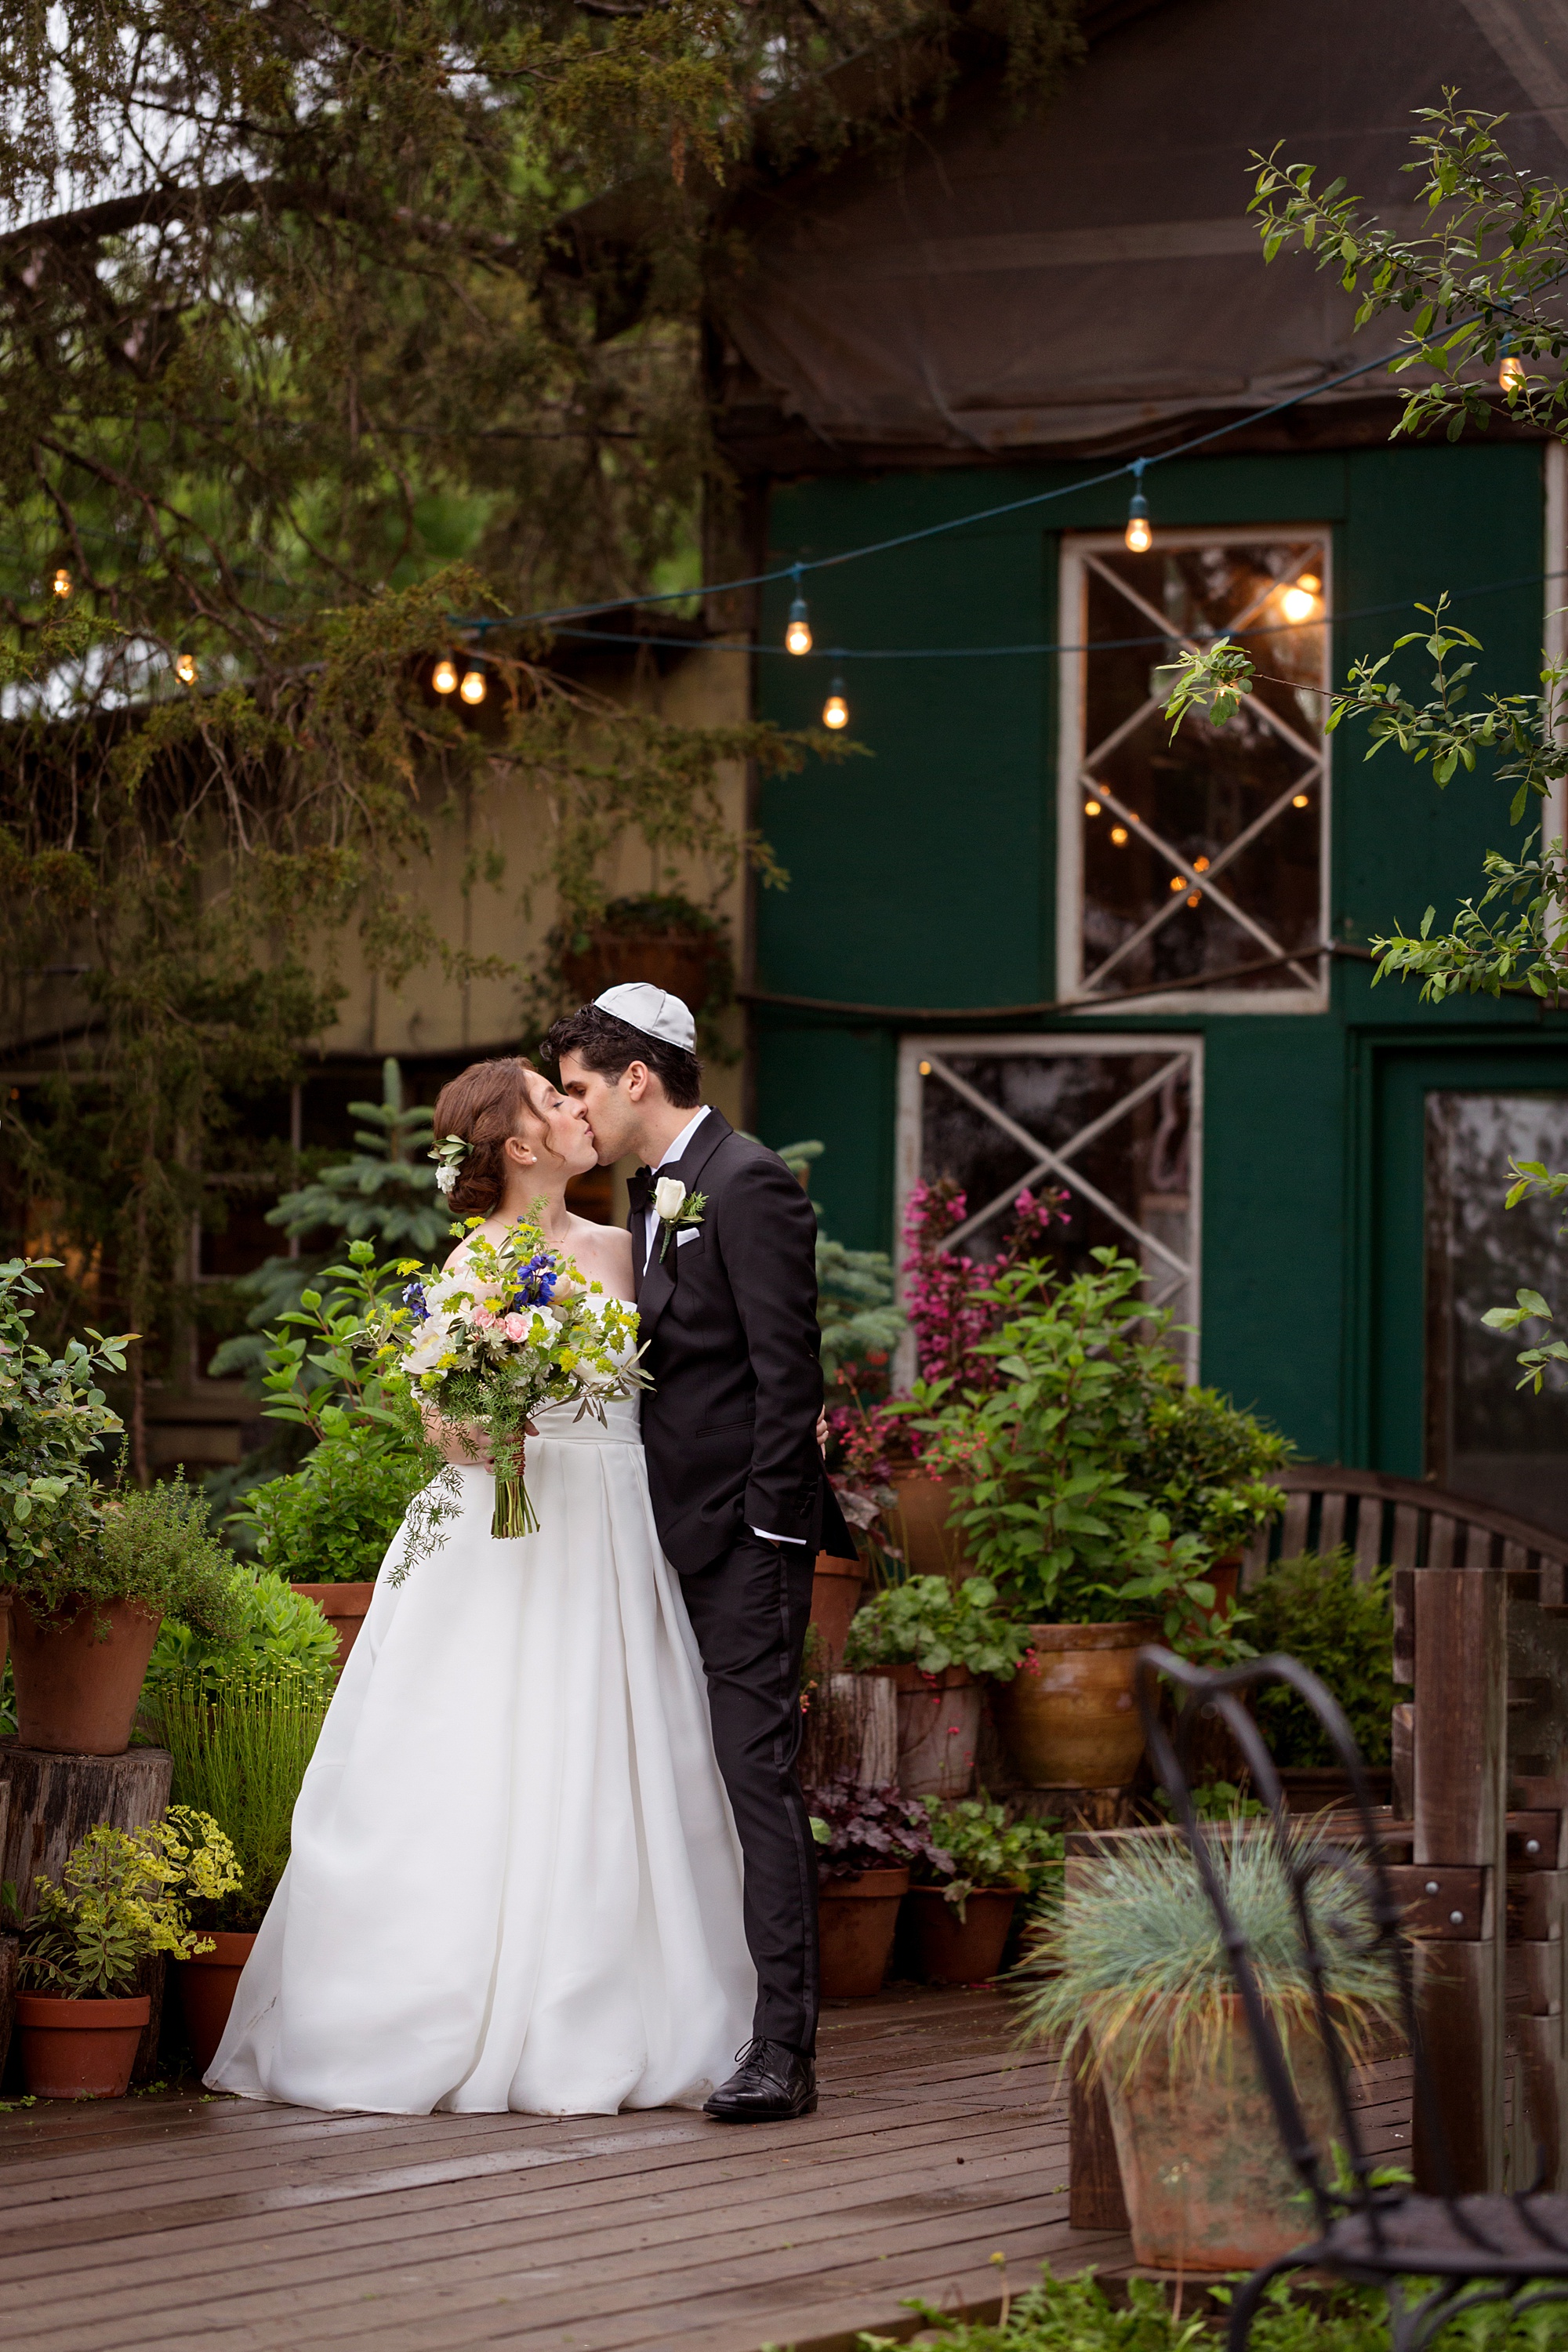 Bride holding large colorful bouquet and groom wearing a yarmulke kiss and stand on an outdoor deck surrounded by plants and lit by bare bulbs in a photo by Kyo Morishima